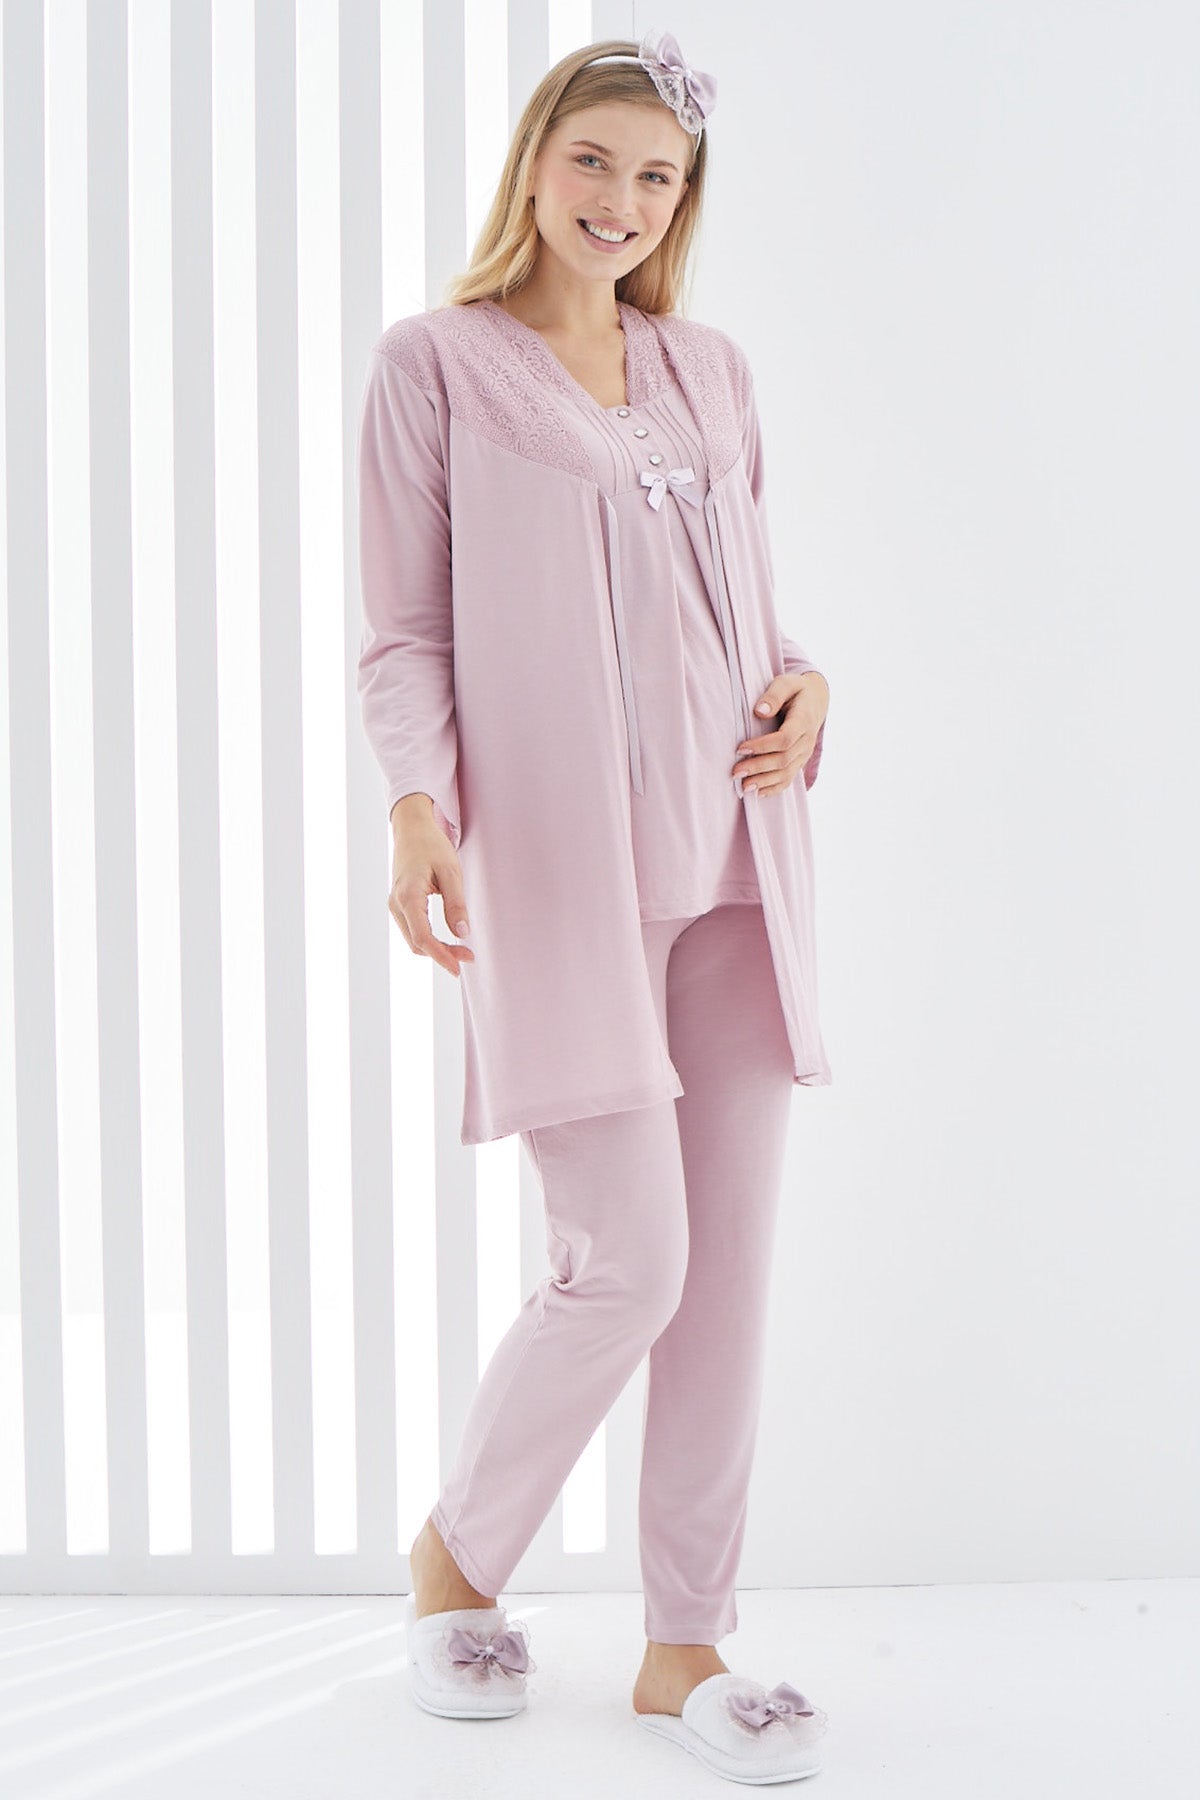 Shopymommy 3402 Lace 3-Pieces Maternity & Nursing Pajamas With Guipure Robe Dried Rose